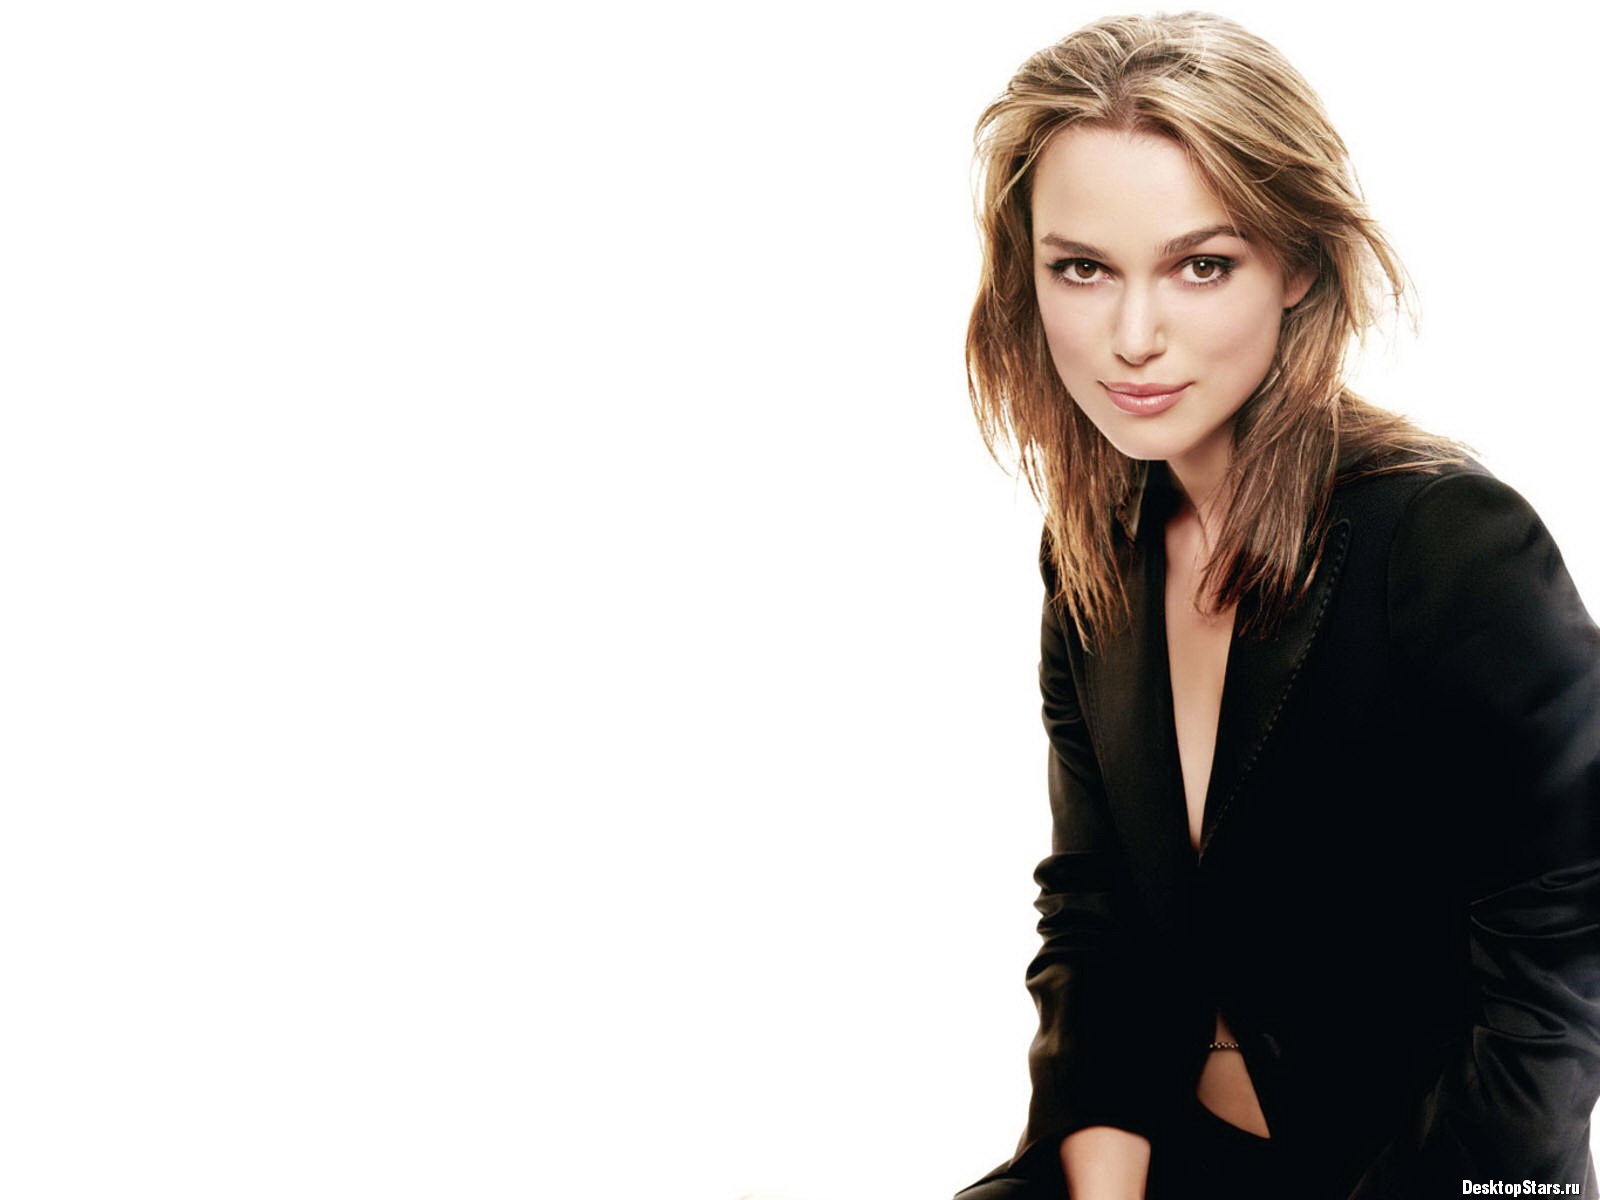 Keira Knightley #091 - 1600x1200 Wallpapers Pictures Photos Images